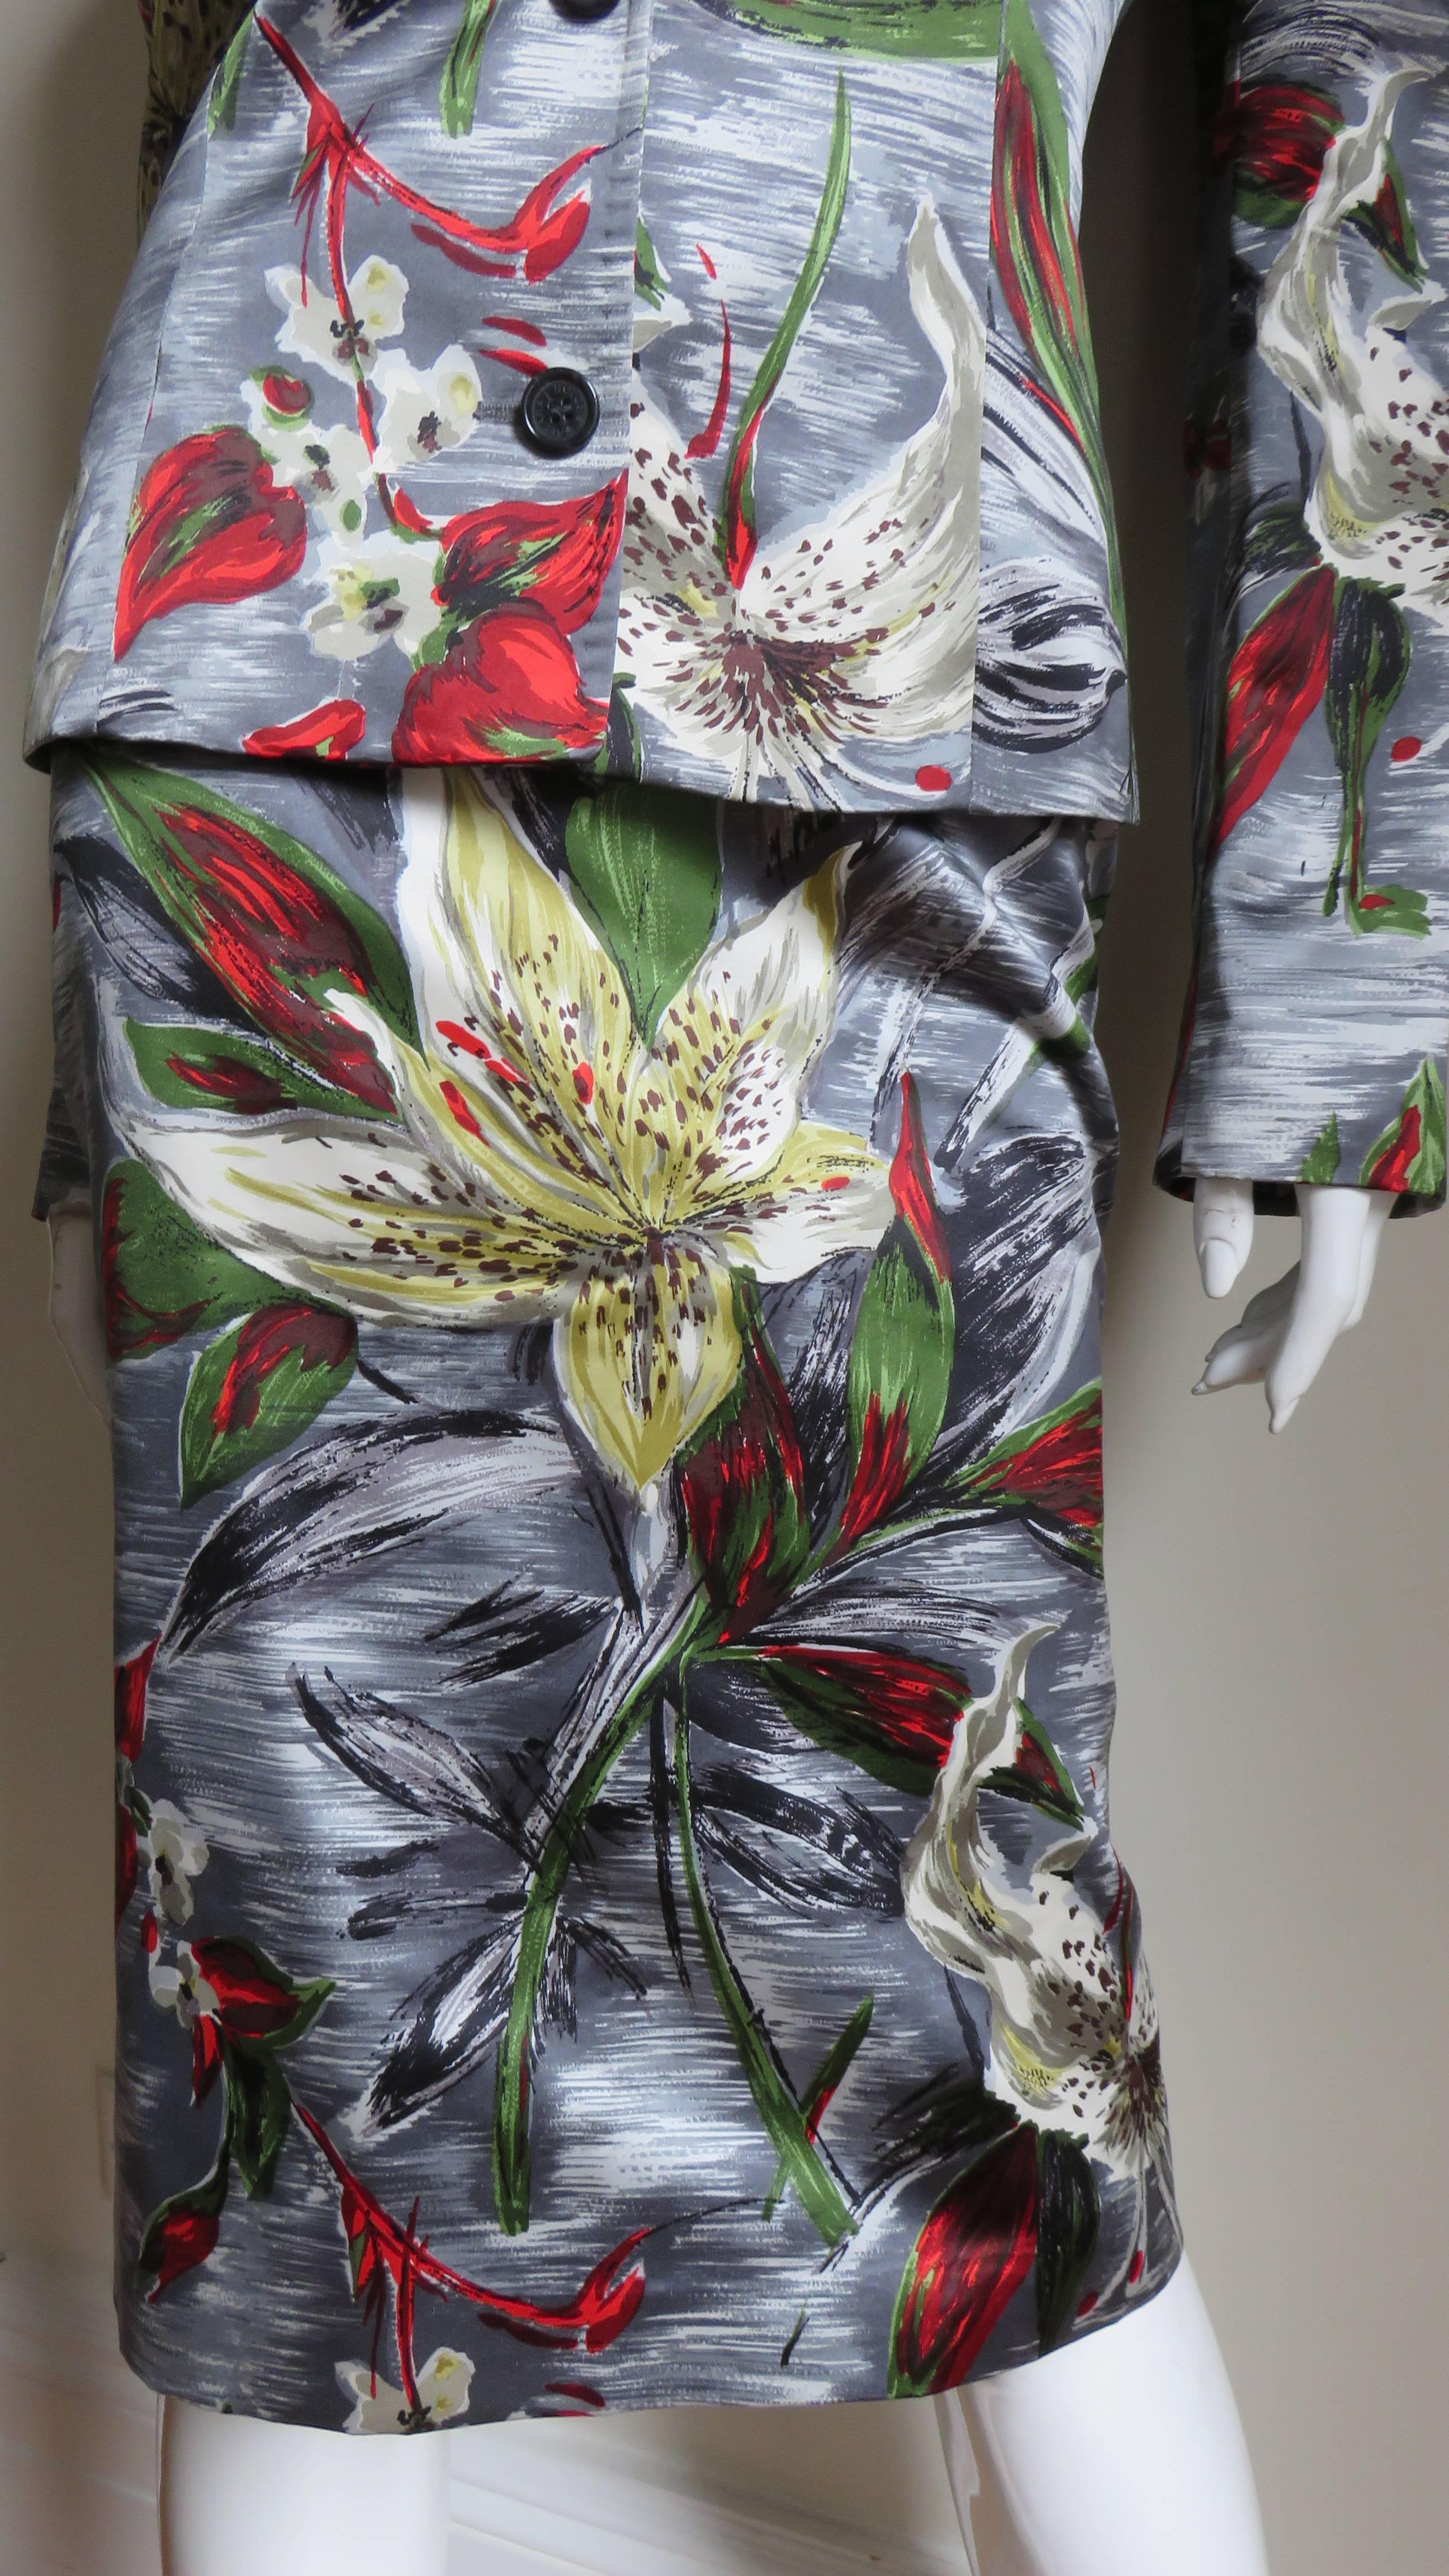 Dolce & Gabbana Silk Flower Print Skirt Suit In Excellent Condition For Sale In Water Mill, NY